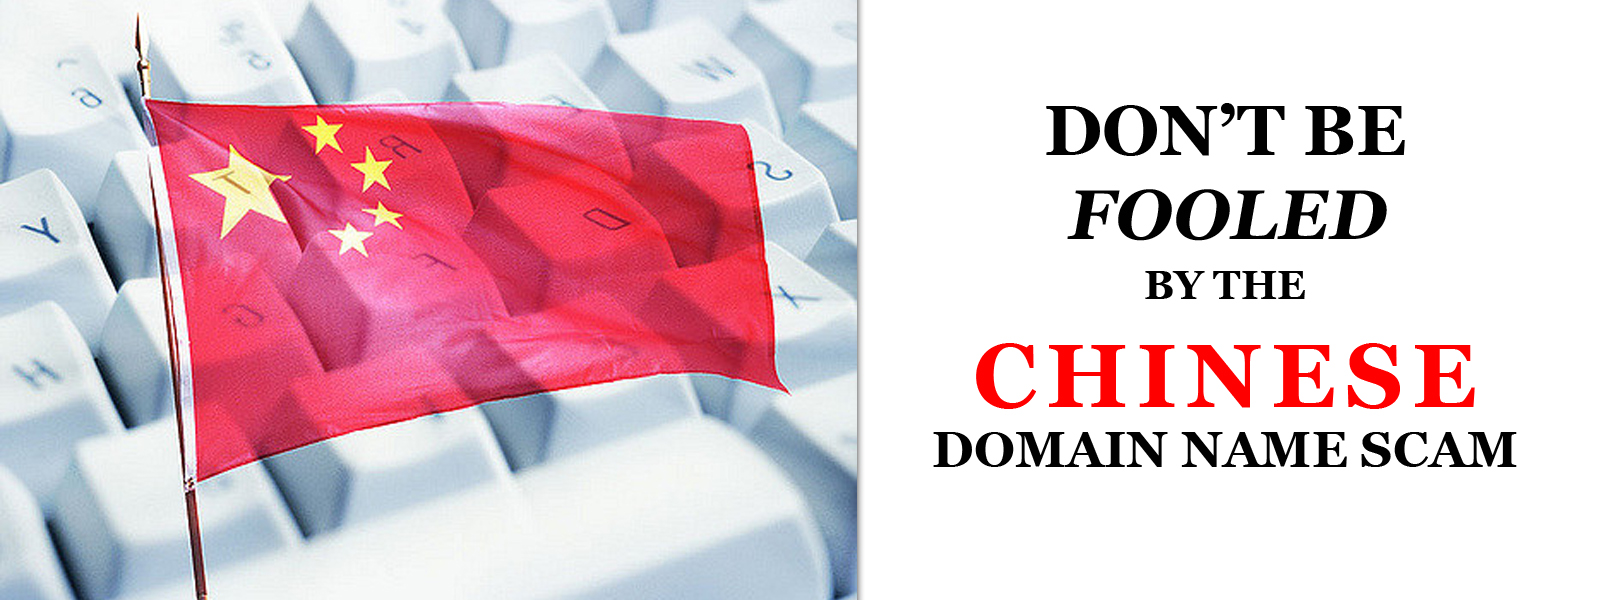 Beware of Chinese Domain Scams